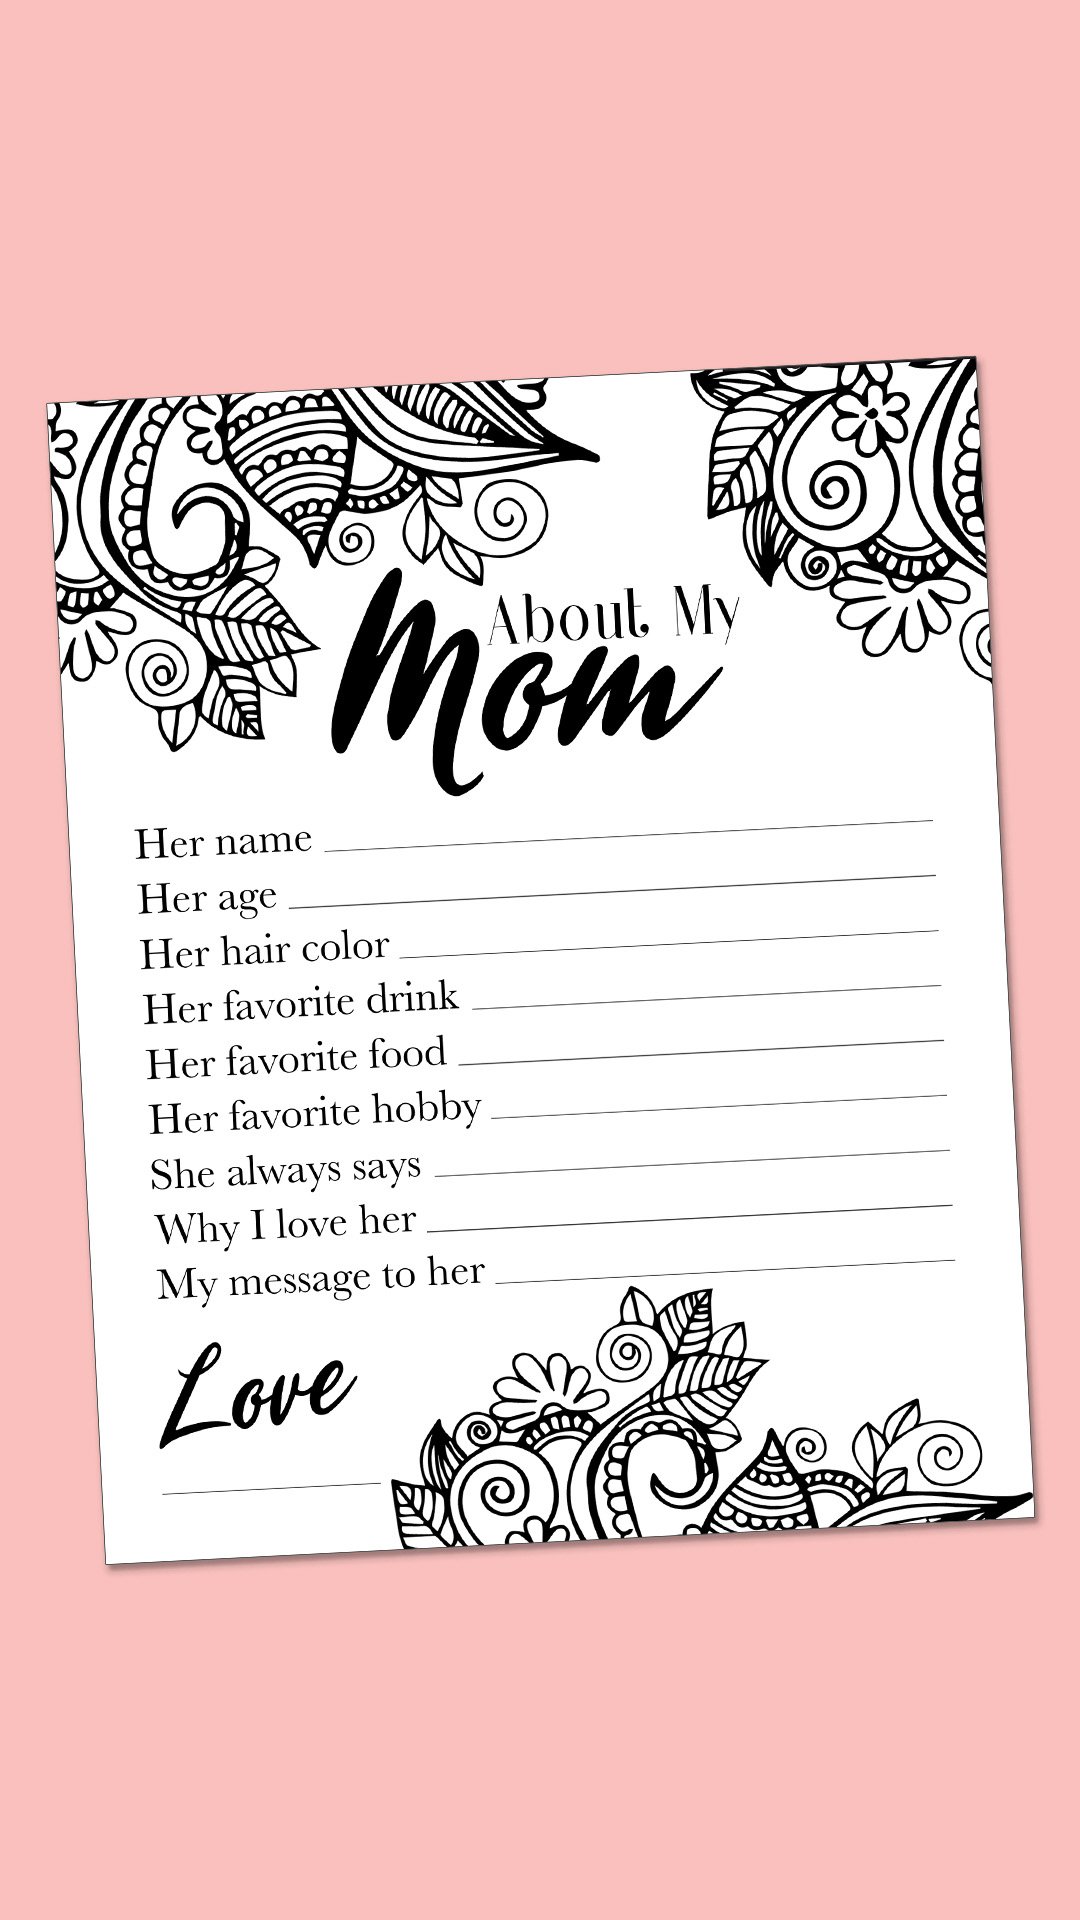 All About My Mom printable isolated on pink background